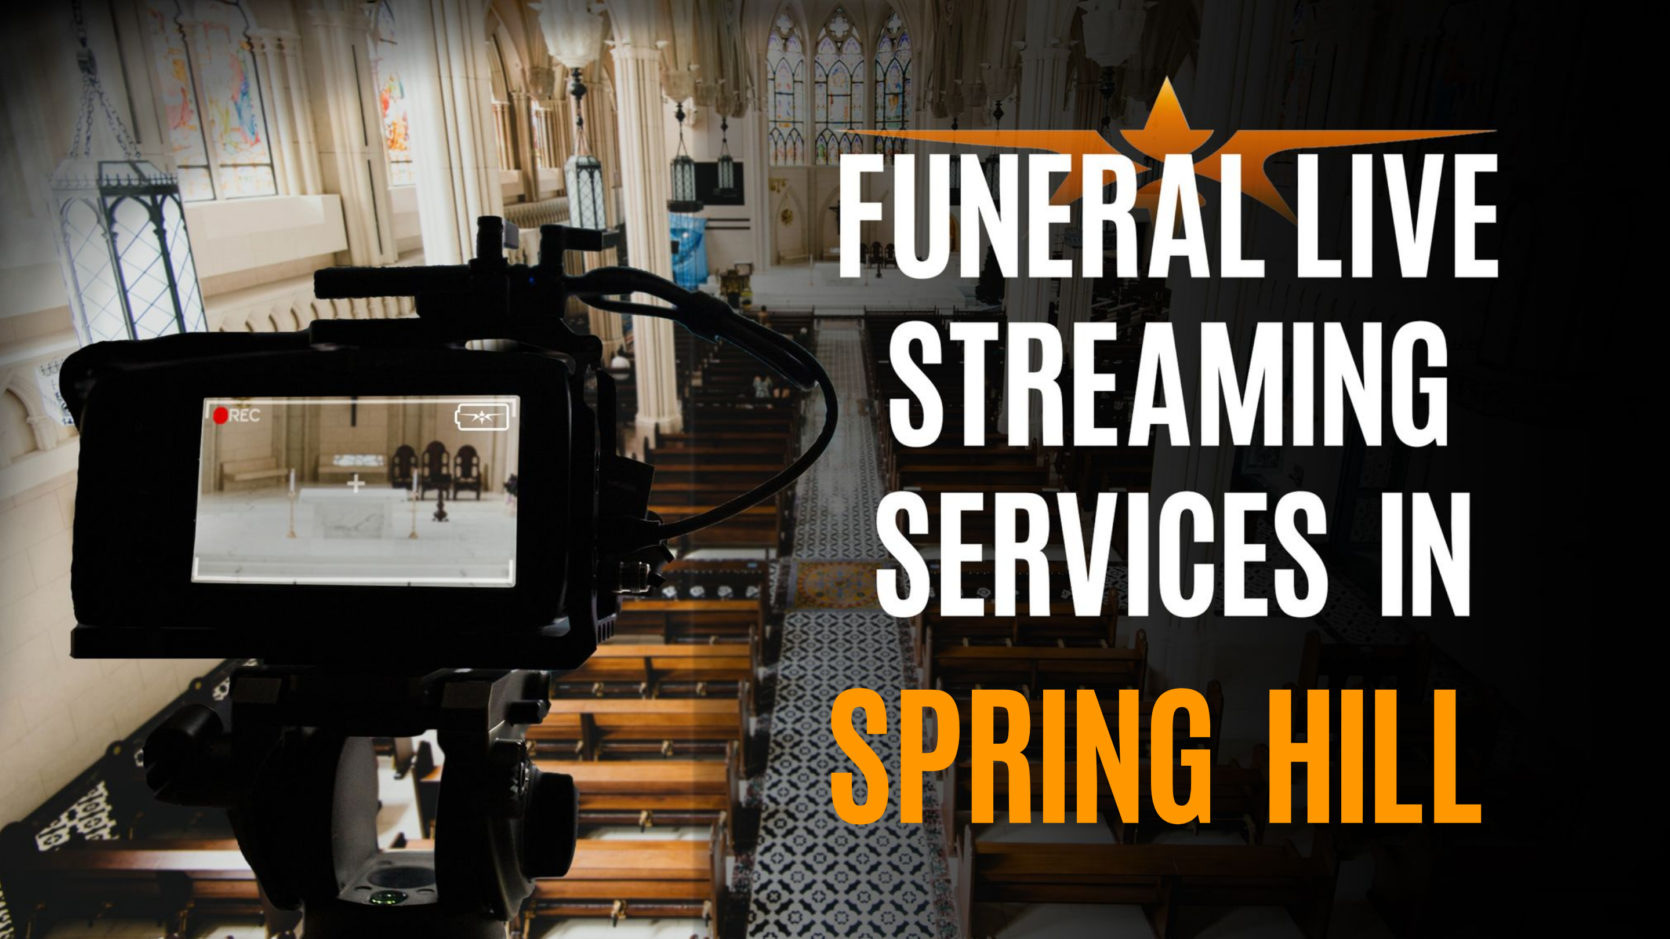 Funeral Live Streaming Services in Spring Hill